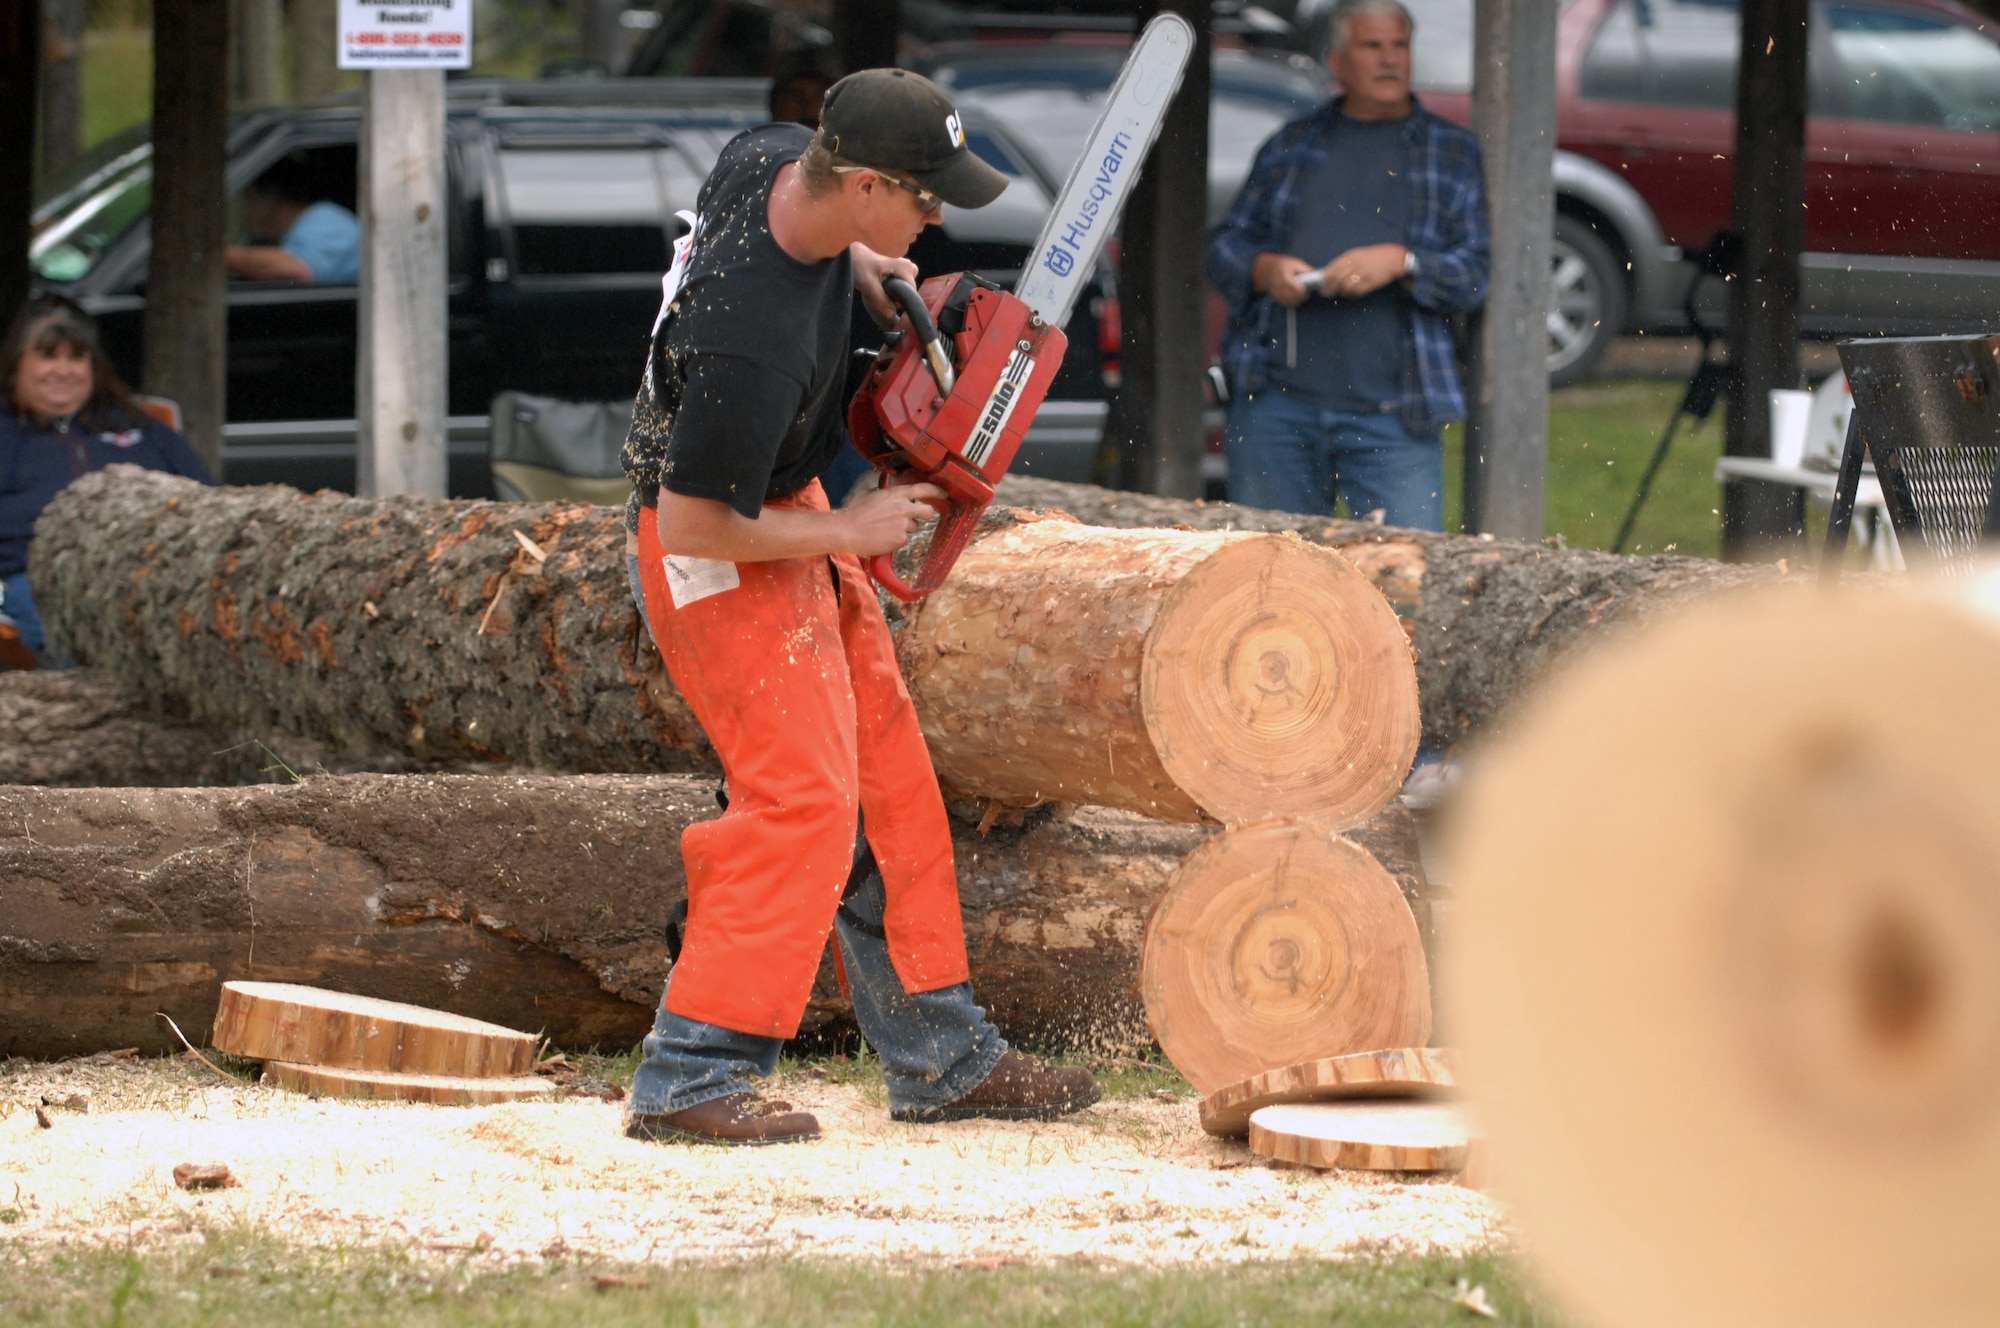 Josh Dees prepares to cut down a piece of pine wood during Lumberjack Day. Head to head competitions were held in Cloudcroft, N.M., for all locals and lumberjacks to come out and enjoy, September 20. (U.S. Air Force photo/Airman 1st. Class Veronica Salgado)